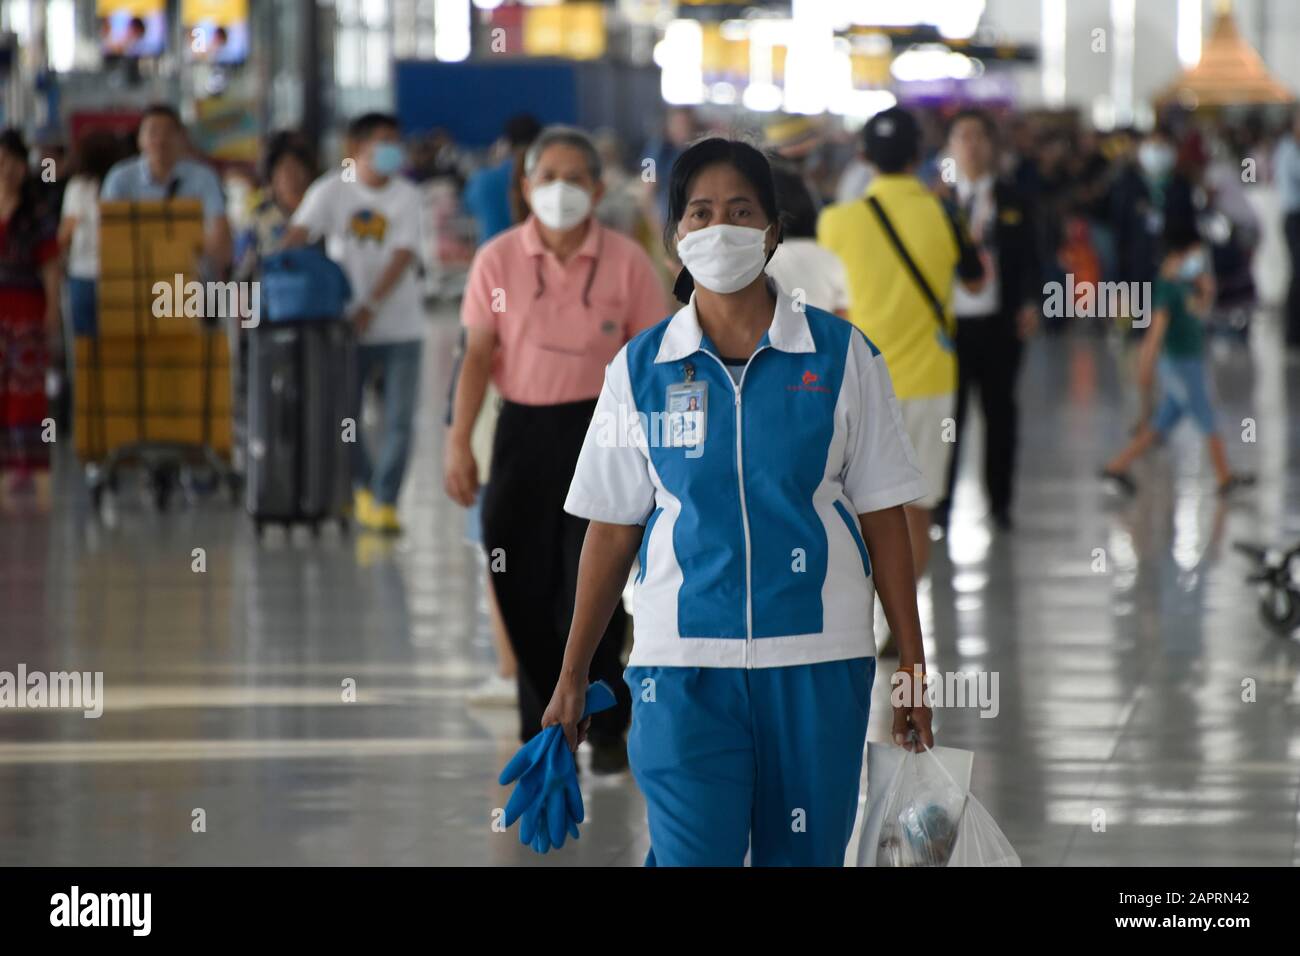 Bangkok, Thailand. 24th Jan, 2020. 2019-nCoV 2019 nCoV Coronavirus Corona Virus Outbreak in South East Asia. Staff and Passengers wear masks to guard against Coronavirus, Suvarnabhumi Airport, Bangkok, Thailand. Staff and passengers step up biosecurity measures by wearing face masks after the Coronavirus has killed a confirmed 26 people, and the number of cases reaches 1000. It comes on the eve of the Chinese New Year, when millions of people throughout South East Asia traditionally return home, increasing the risk of spread. Credit: Stephen Barnes/Alamy Live News Stock Photo